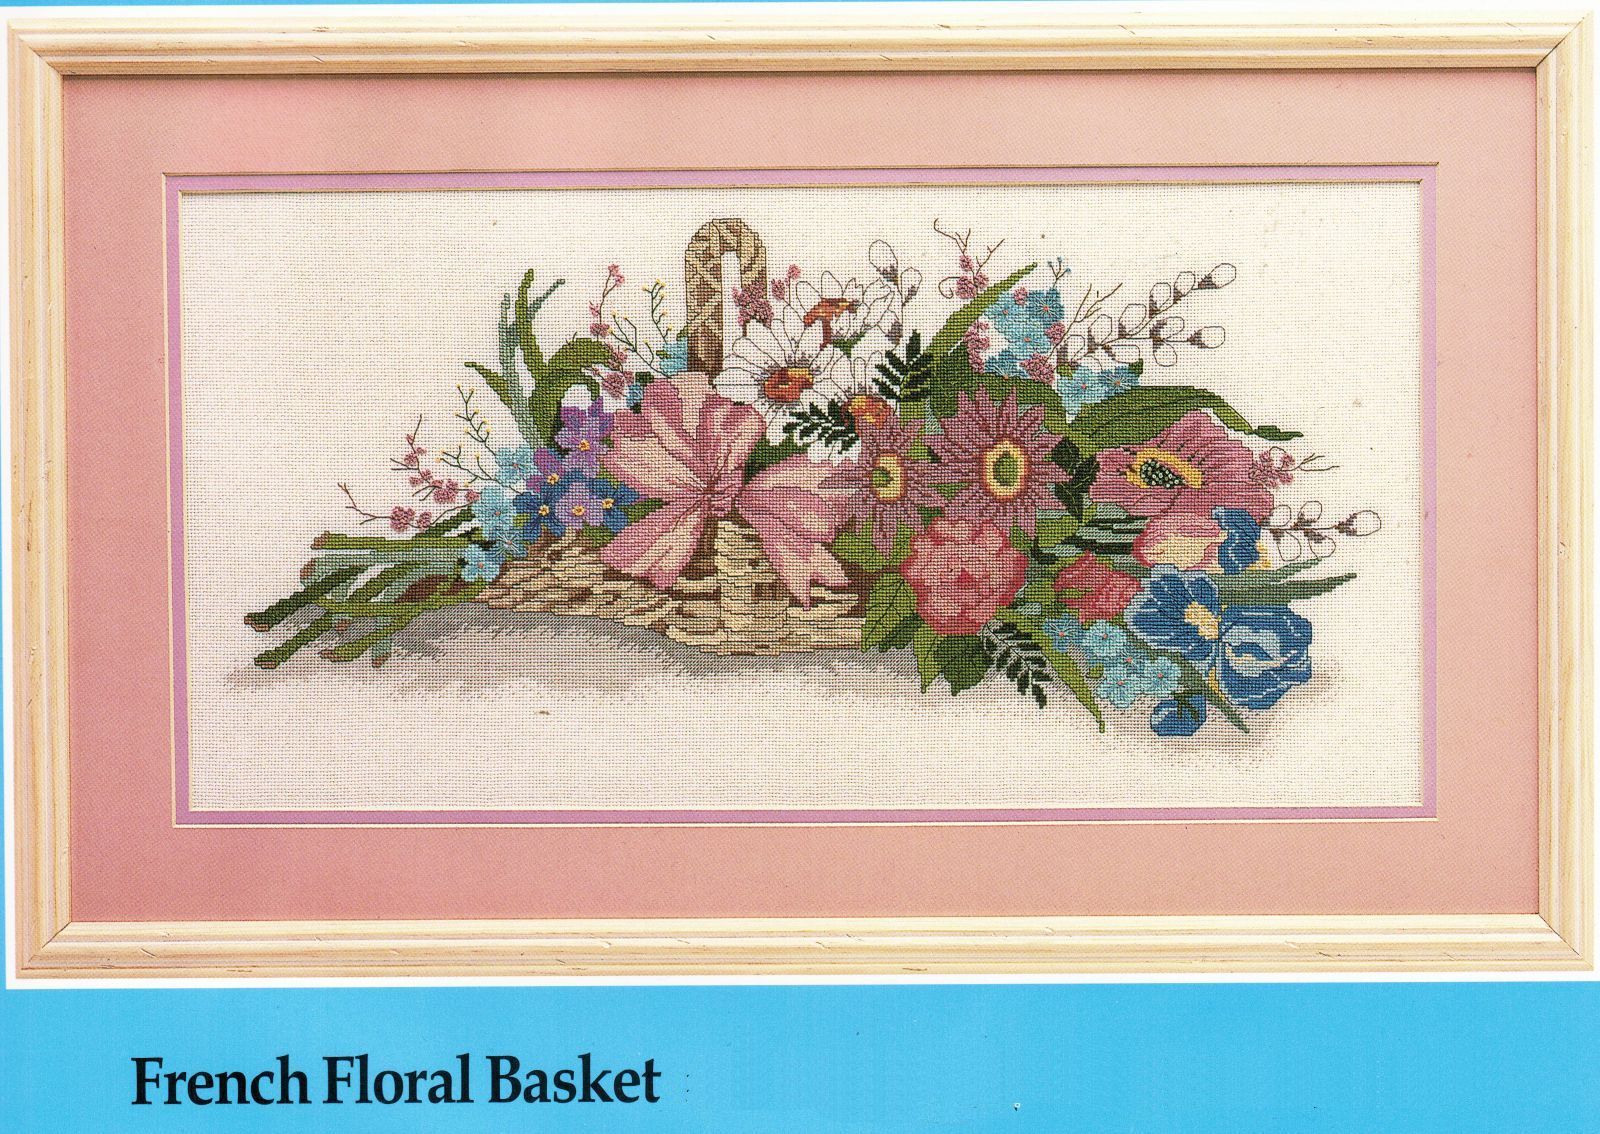 Candamar Designs Counted Cross Stitch French Floral Basket Kit 20" x 10"  - $21.99